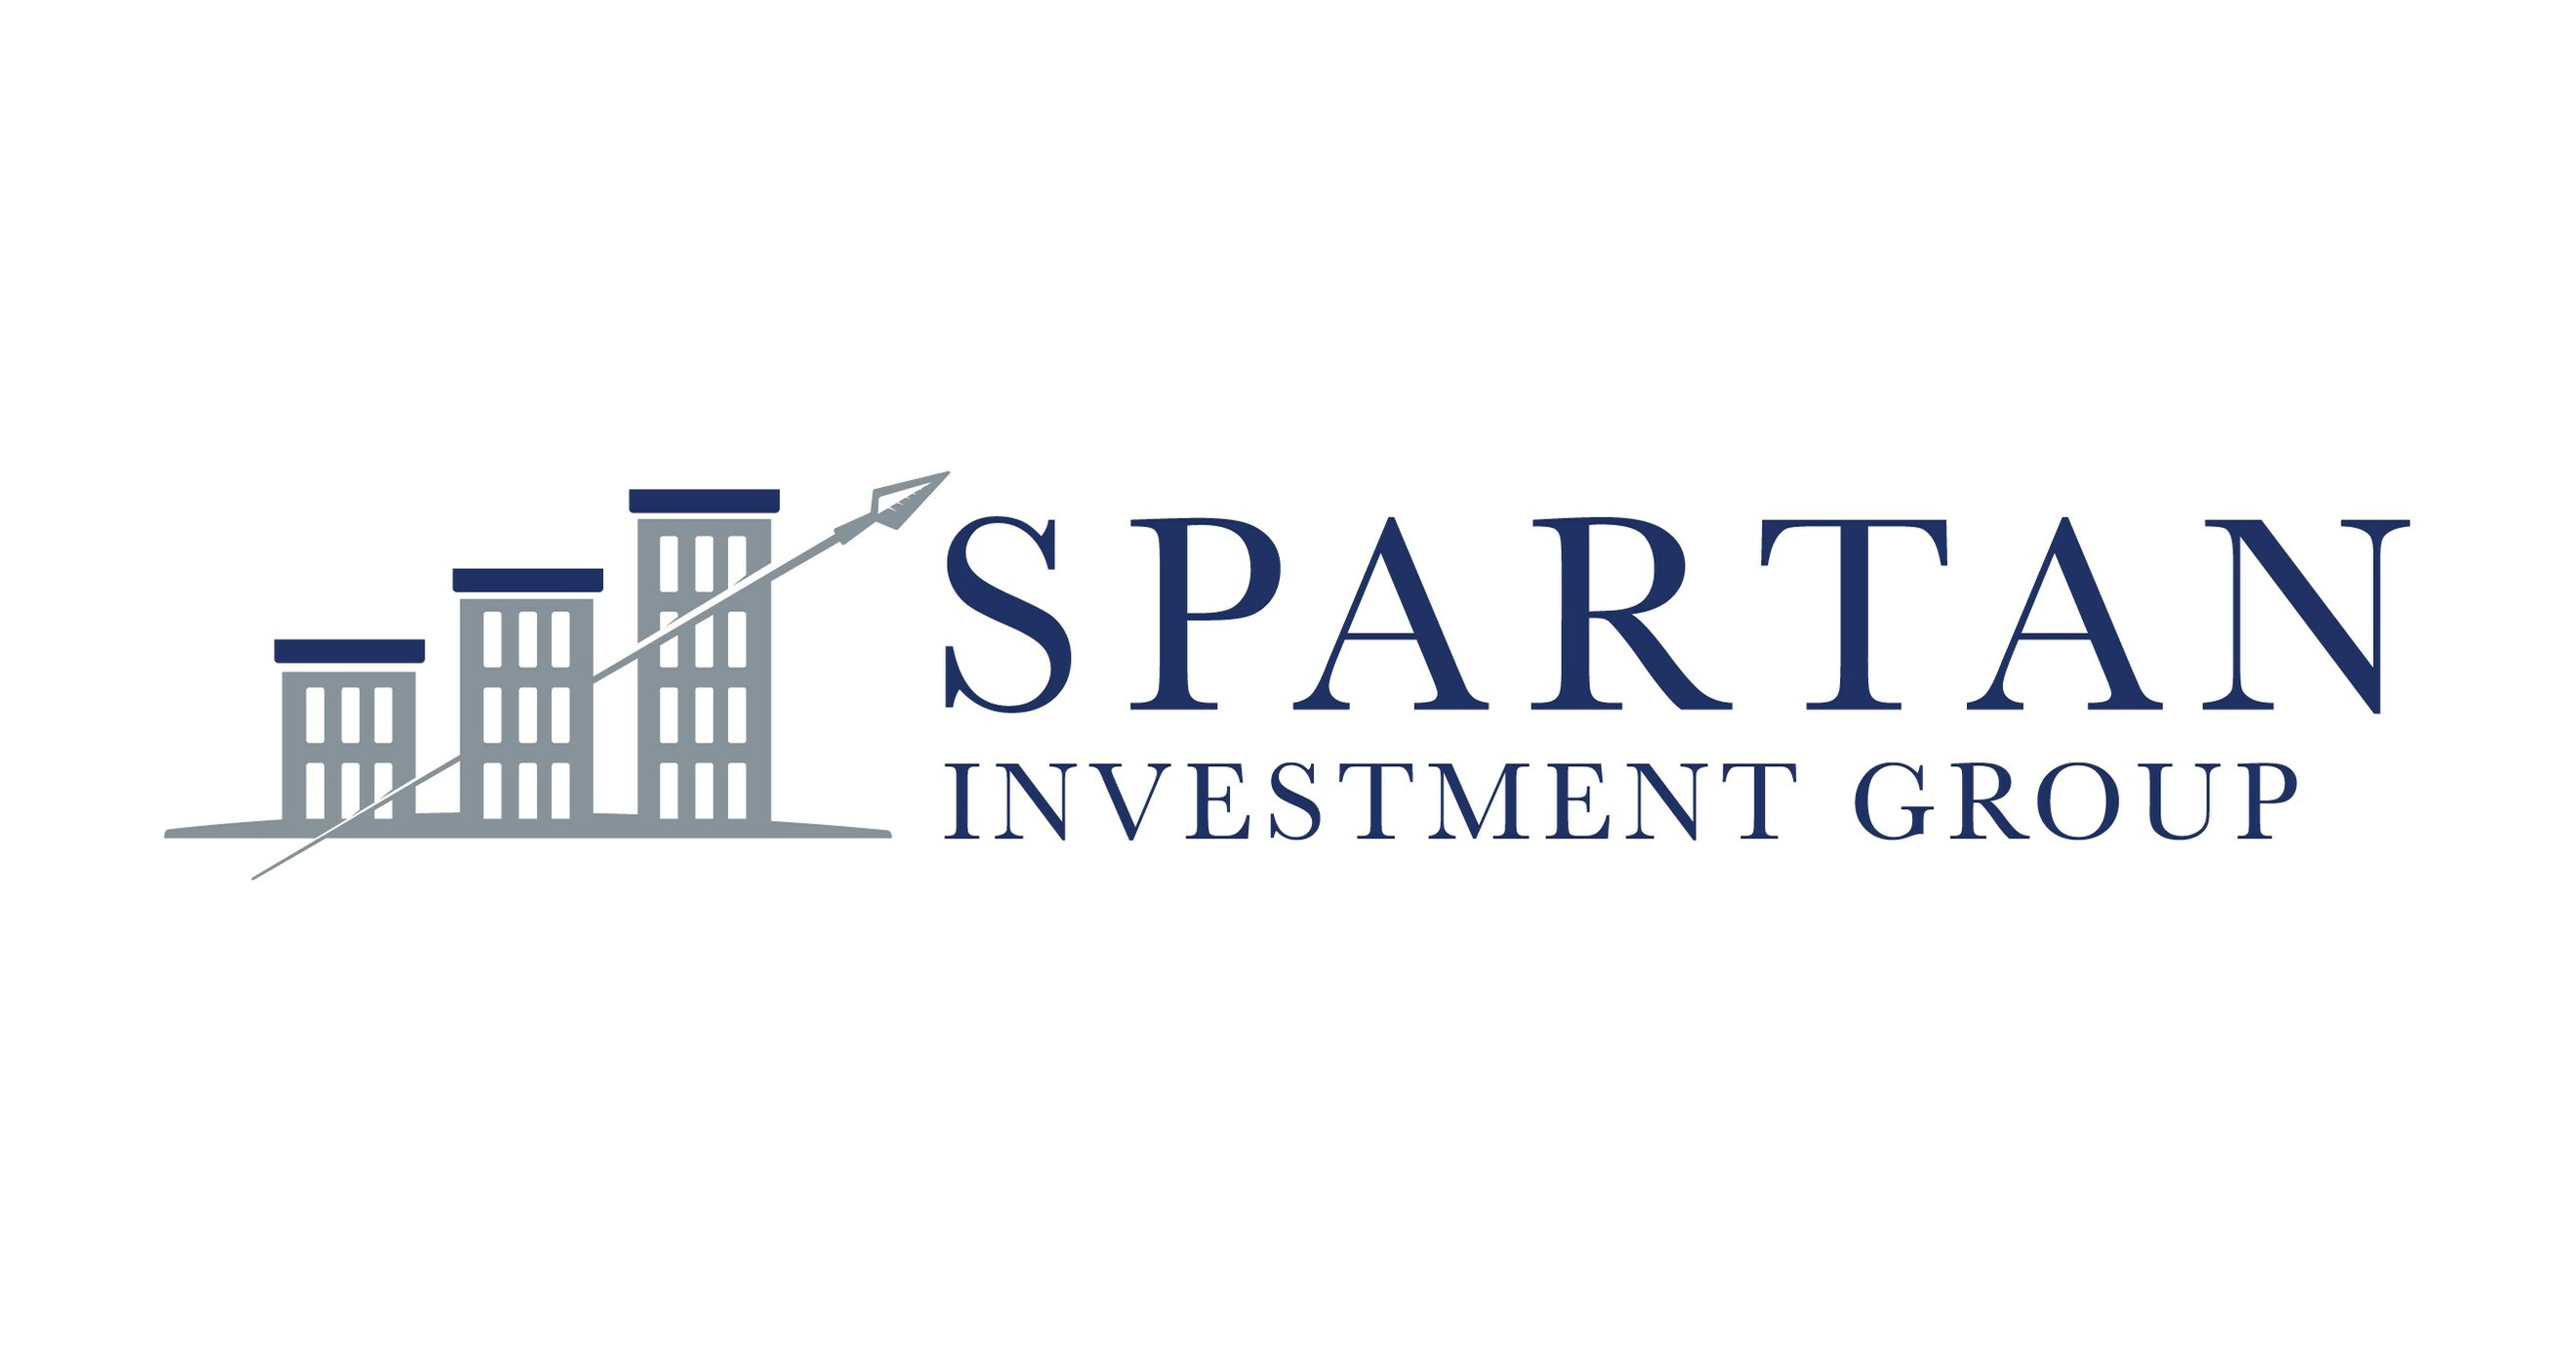 SPARTAN INVESTMENT GROUP LAUNCHES THREE NEW SELF-STORAGE FUNDS